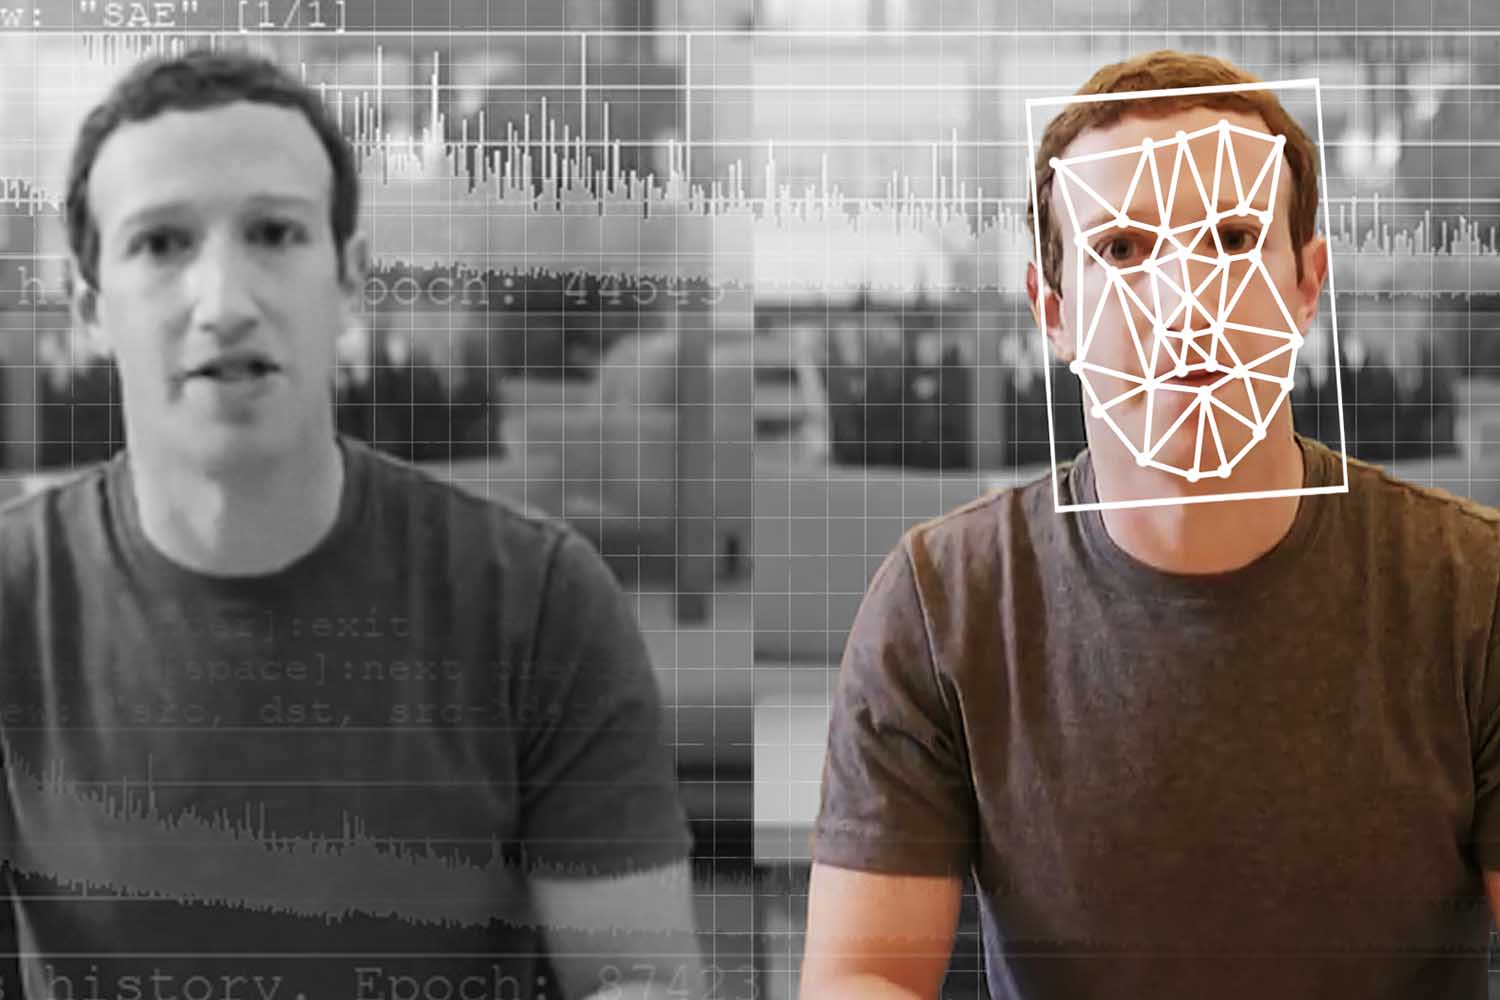 A New Deepfake Technology Allows You to Make People in Photographs Say Whatever You Want